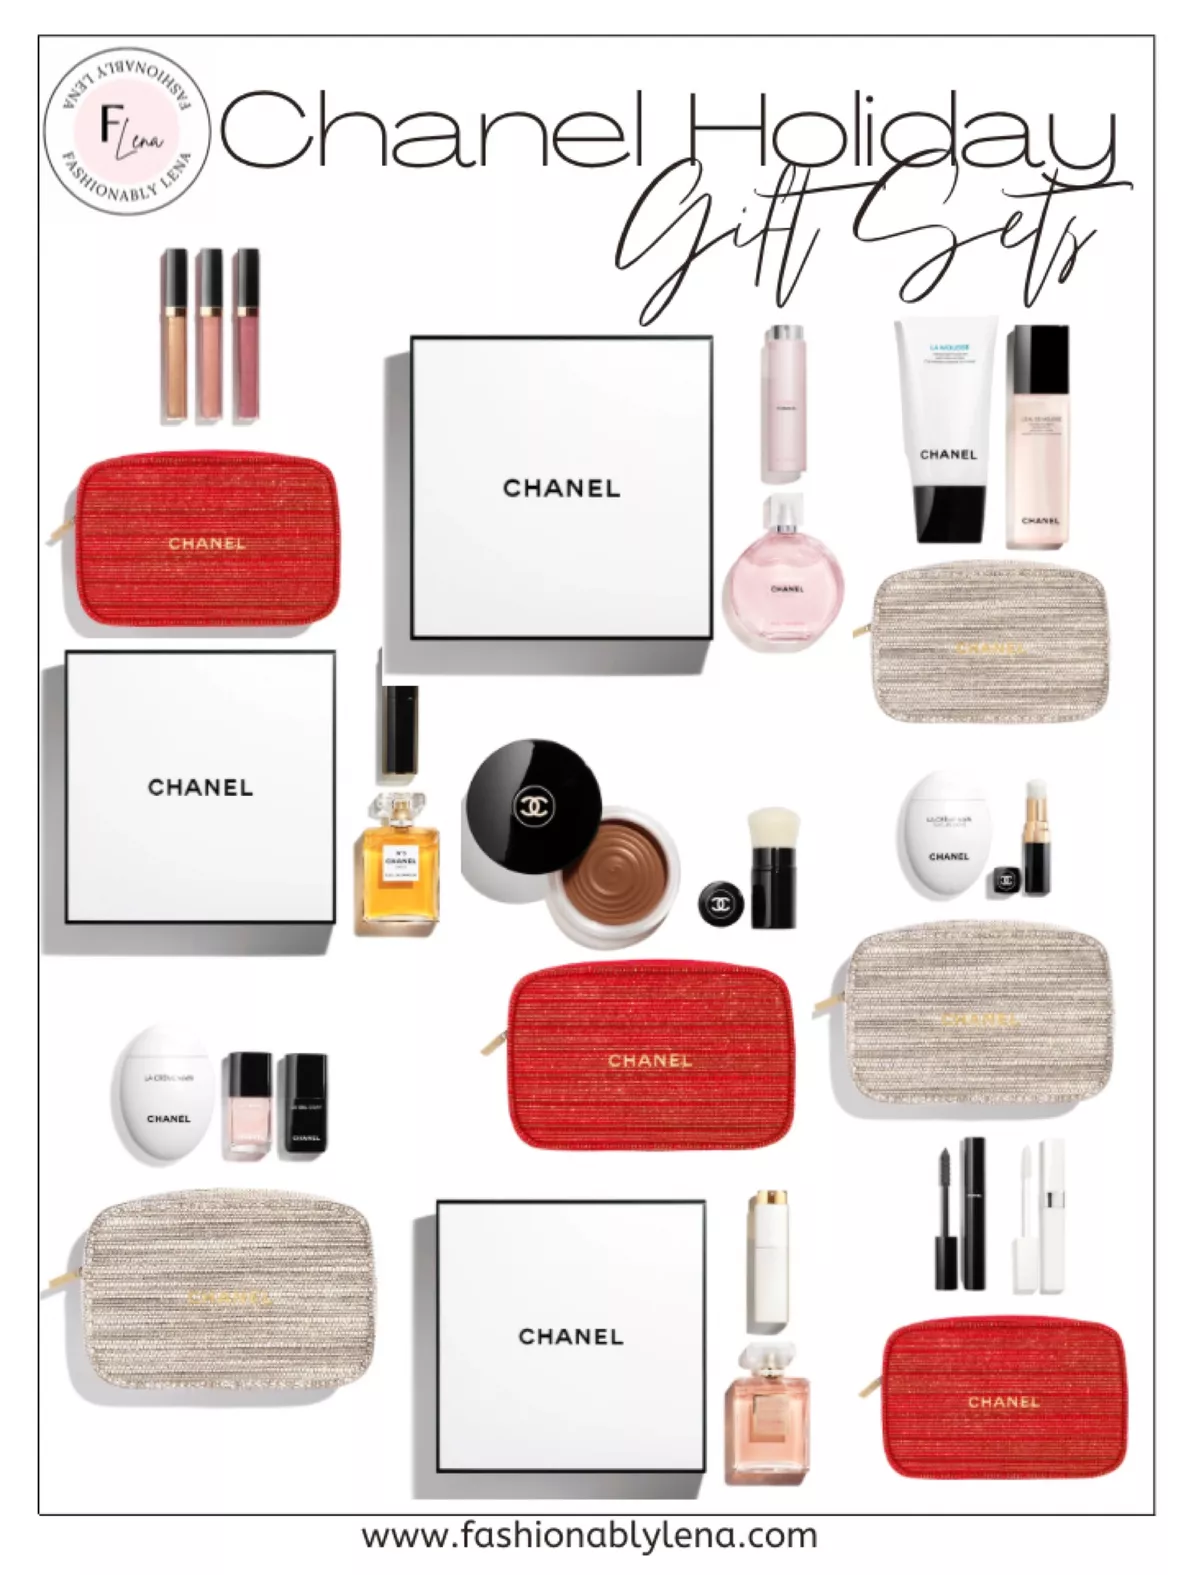 Chanel Makeup & Beauty Holiday Gift Sets  Chanel gift sets, Chanel makeup, Makeup  gift sets